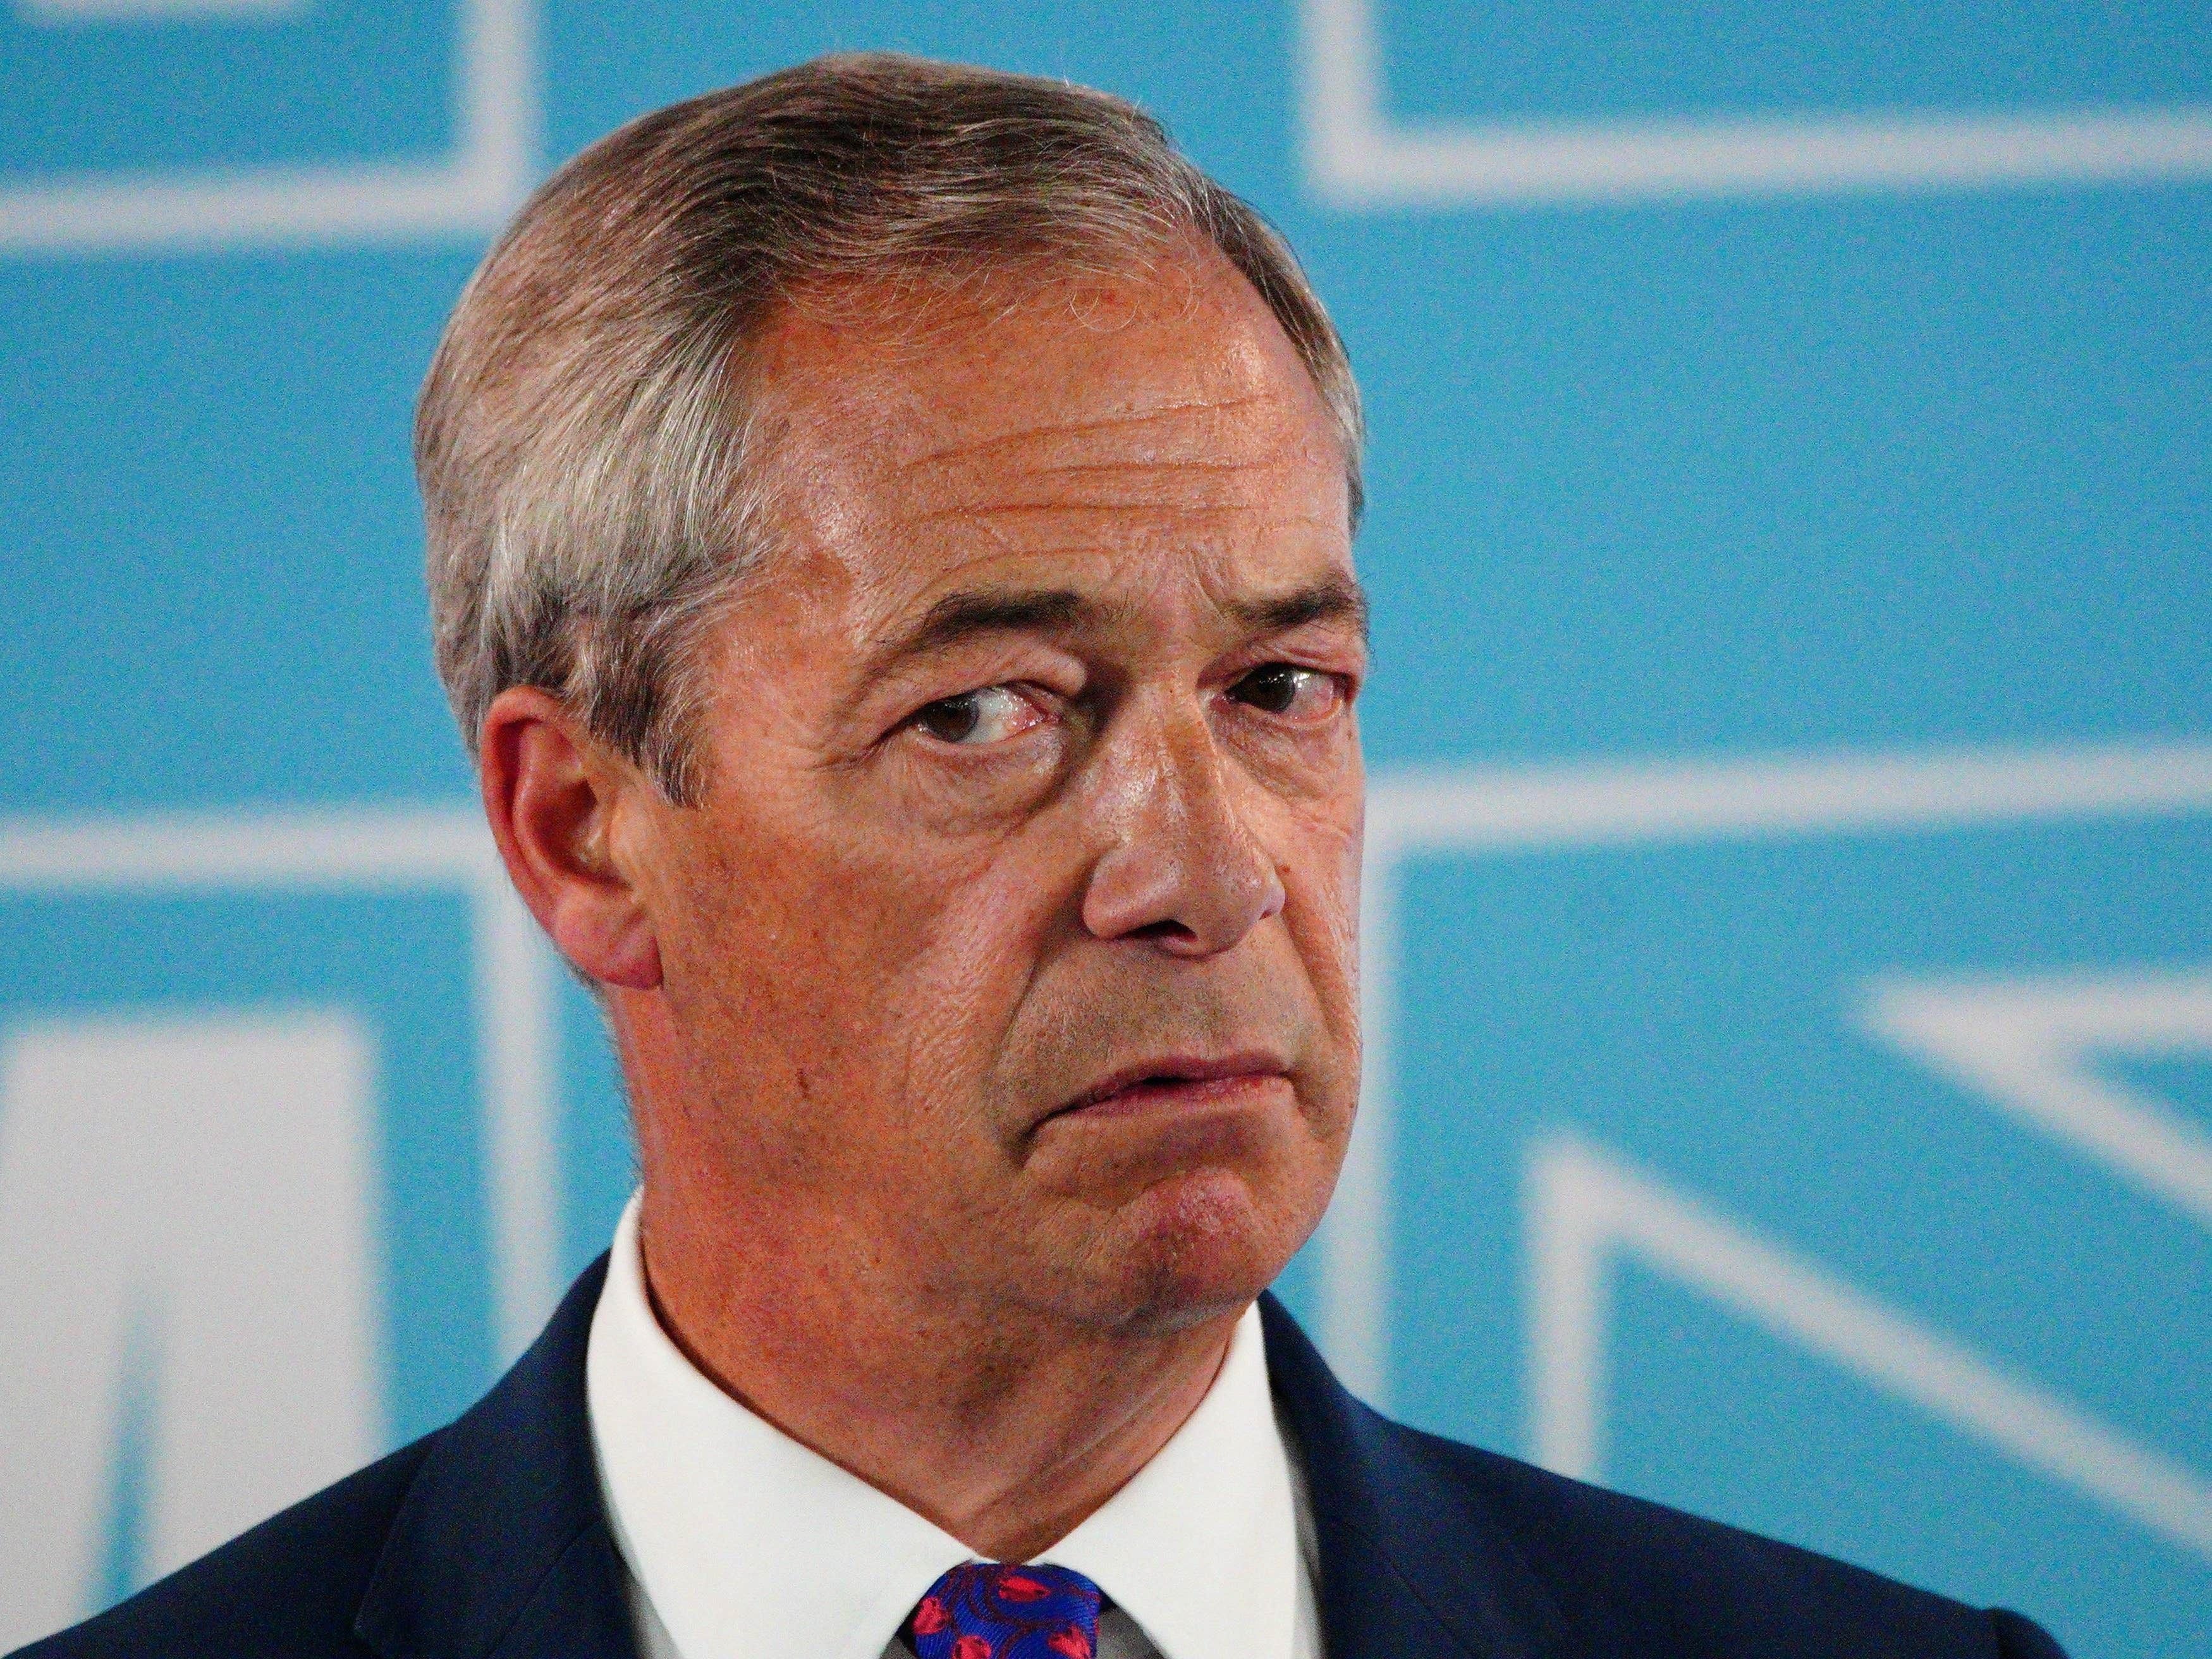 BBC adds Question Time show with Reform after Farage complaints over exclusion